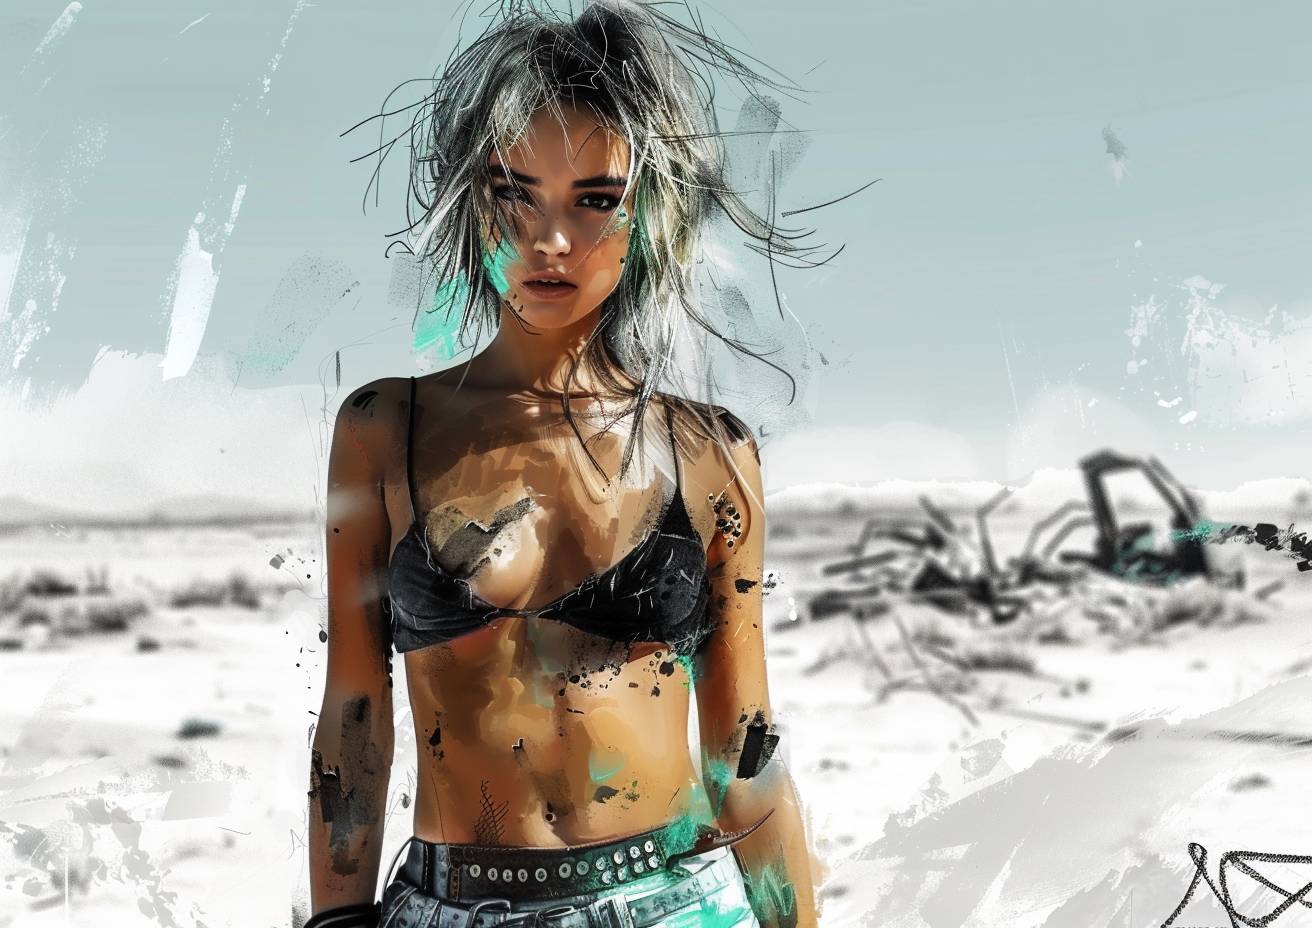 Wide-angle view, in a post-apocalyptic future, a young woman wearing animal skins, studded leather belt, wielding a metal boomerang, desert wasteland, wreckage, strong visual flow.